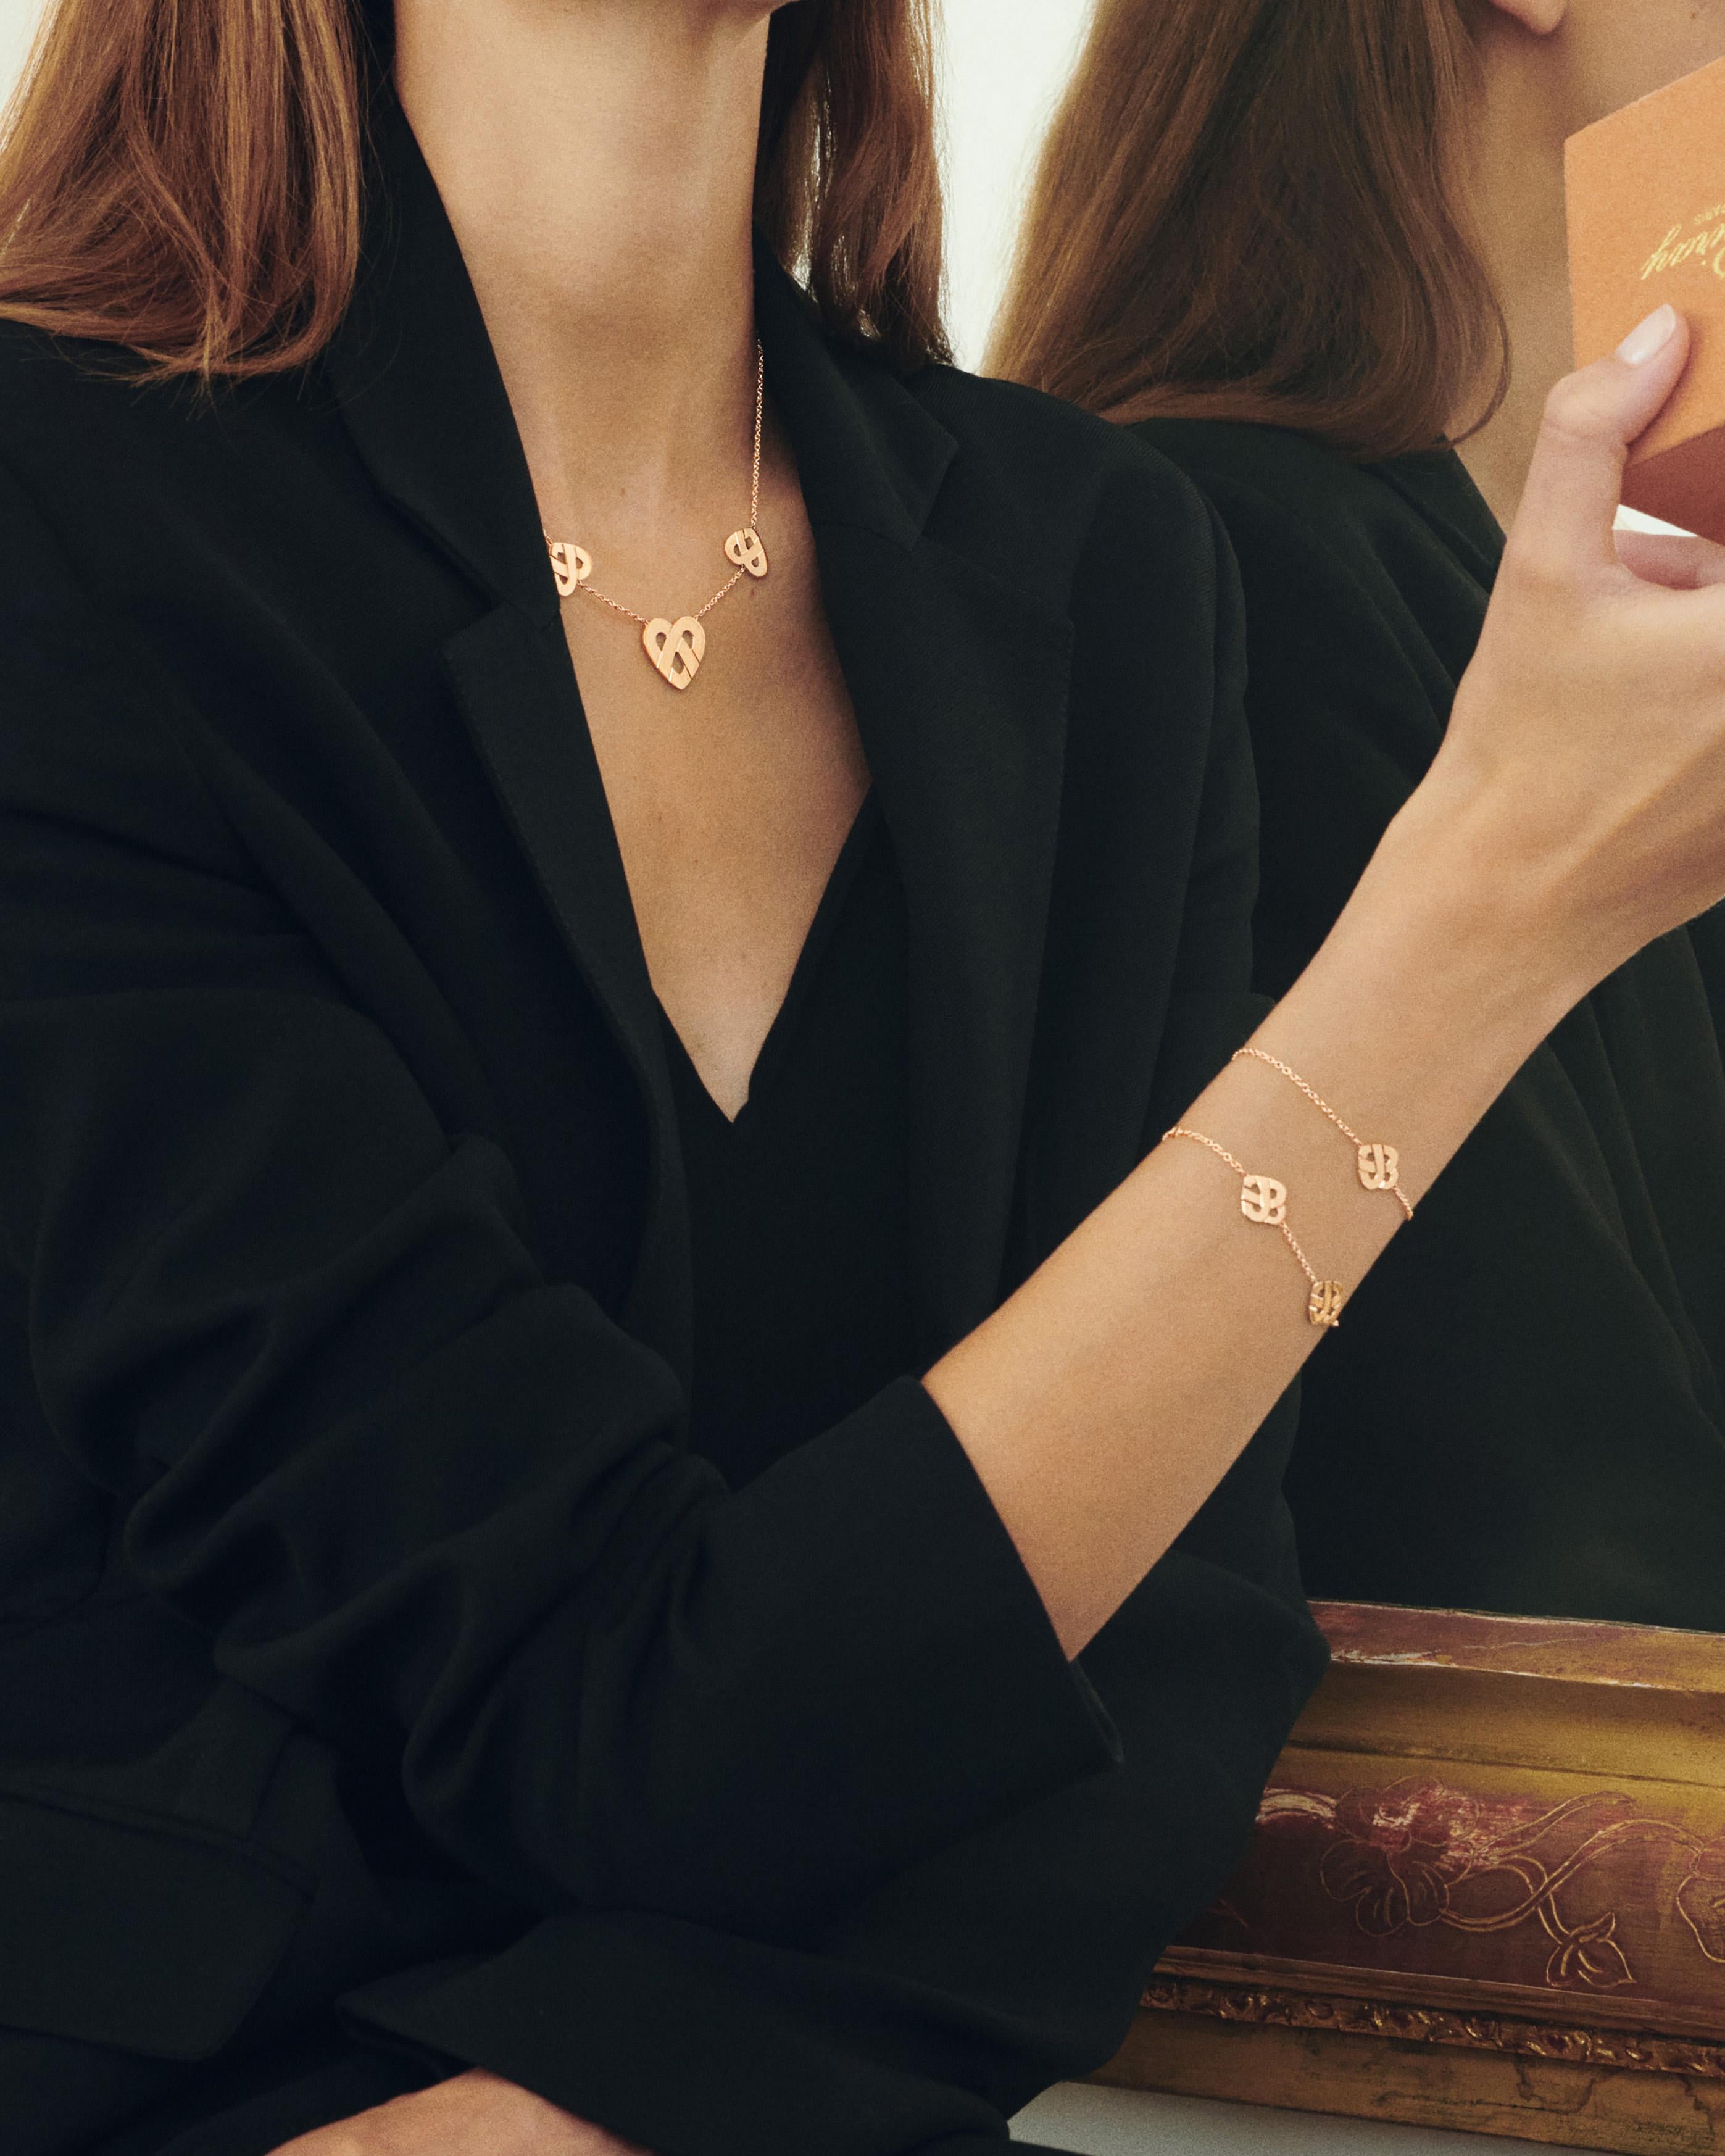 The timeless Poiray collection Cœur Entrelacé is revealed in pure lines, with generous curves, and is dressed in gold or diamonds to celebrate all loves.

Cœur Entrelacé bracelet in rose gold.

Please note that the carat weight, number of stones and